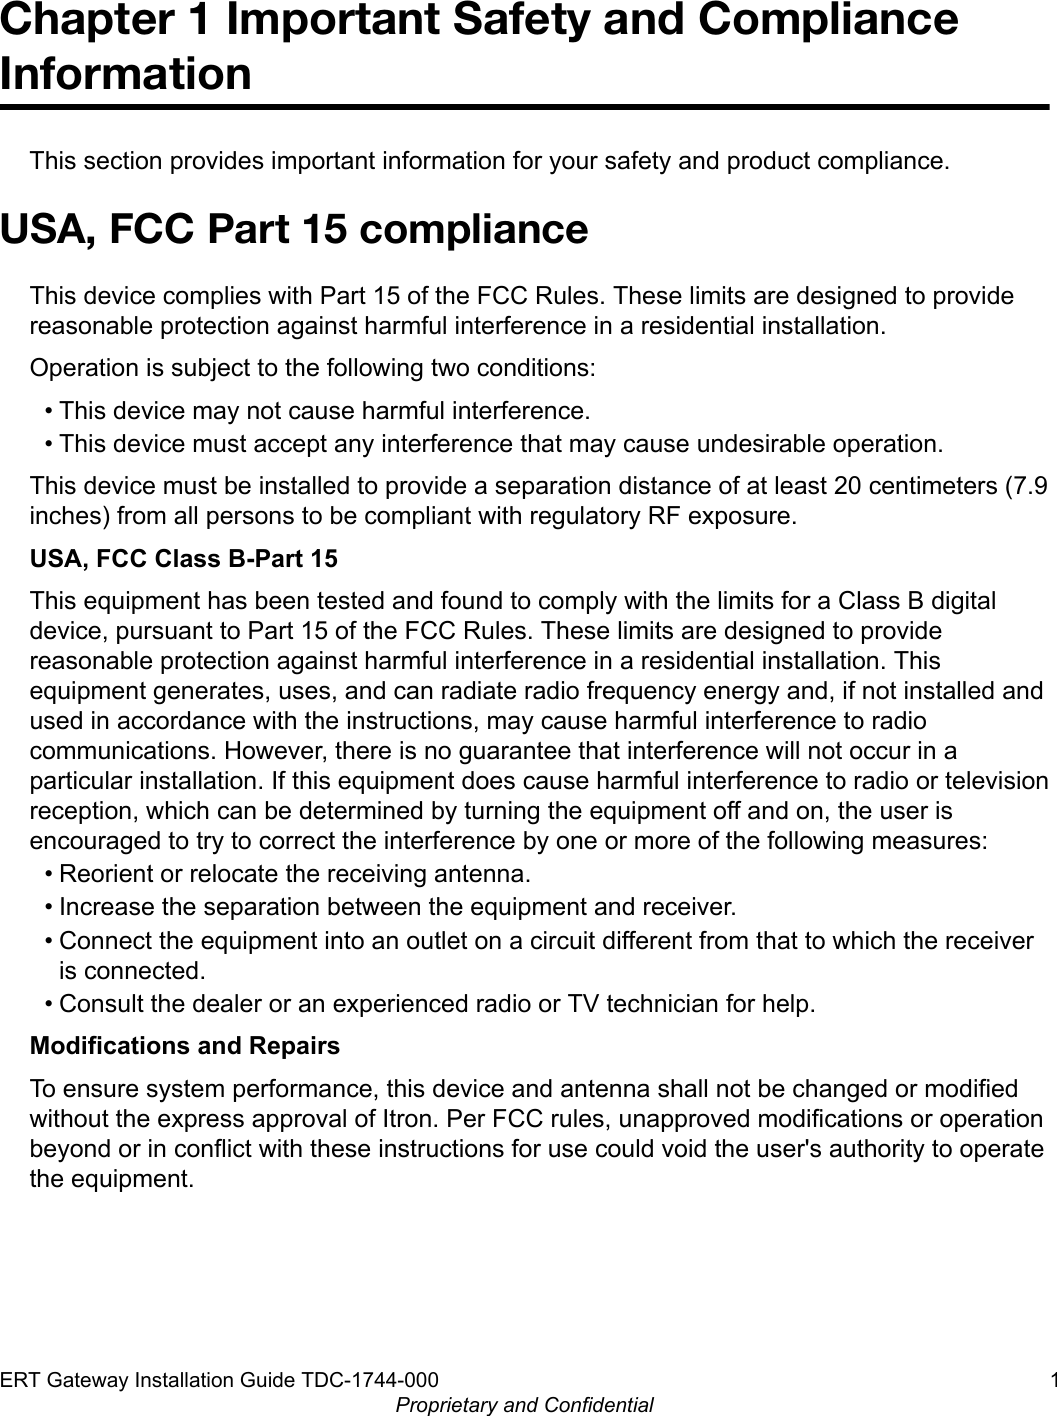 Chapter 1 Important Safety and ComplianceInformationThis section provides important information for your safety and product compliance.USA, FCC Part 15 complianceThis device complies with Part 15 of the FCC Rules. These limits are designed to providereasonable protection against harmful interference in a residential installation.Operation is subject to the following two conditions:• This device may not cause harmful interference.• This device must accept any interference that may cause undesirable operation.This device must be installed to provide a separation distance of at least 20 centimeters (7.9inches) from all persons to be compliant with regulatory RF exposure.USA, FCC Class B-Part 15This equipment has been tested and found to comply with the limits for a Class B digitaldevice, pursuant to Part 15 of the FCC Rules. These limits are designed to providereasonable protection against harmful interference in a residential installation. Thisequipment generates, uses, and can radiate radio frequency energy and, if not installed andused in accordance with the instructions, may cause harmful interference to radiocommunications. However, there is no guarantee that interference will not occur in aparticular installation. If this equipment does cause harmful interference to radio or televisionreception, which can be determined by turning the equipment off and on, the user isencouraged to try to correct the interference by one or more of the following measures:• Reorient or relocate the receiving antenna.• Increase the separation between the equipment and receiver.• Connect the equipment into an outlet on a circuit different from that to which the receiveris connected.• Consult the dealer or an experienced radio or TV technician for help.Modifications and RepairsTo ensure system performance, this device and antenna shall not be changed or modifiedwithout the express approval of Itron. Per FCC rules, unapproved modifications or operationbeyond or in conflict with these instructions for use could void the user&apos;s authority to operatethe equipment.ERT Gateway Installation Guide TDC-1744-000 1Proprietary and Confidential